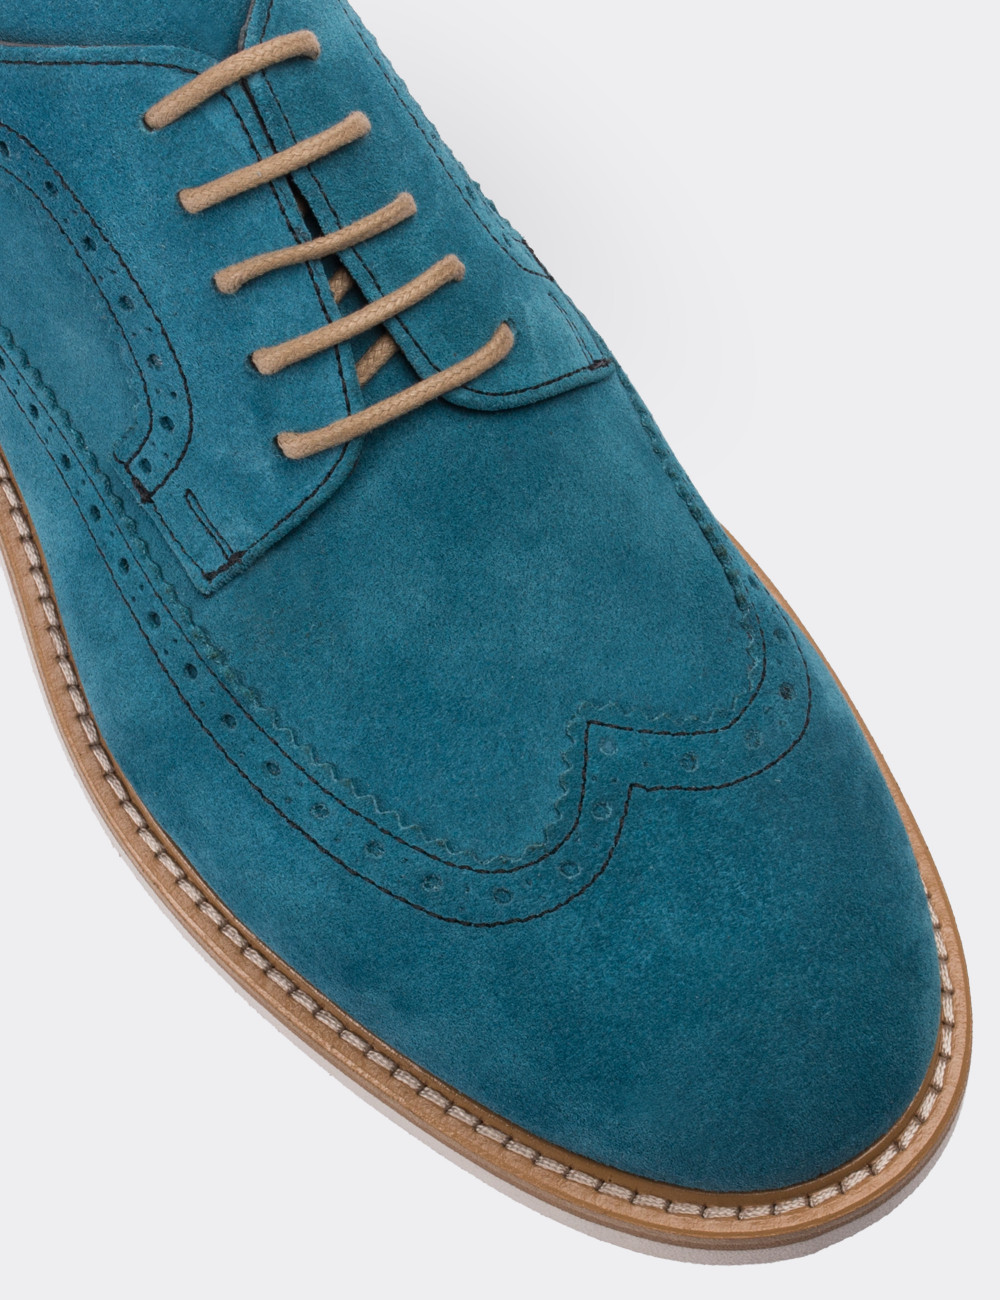 Blue Suede Leather Lace-up Shoes - 01293MMVIE01